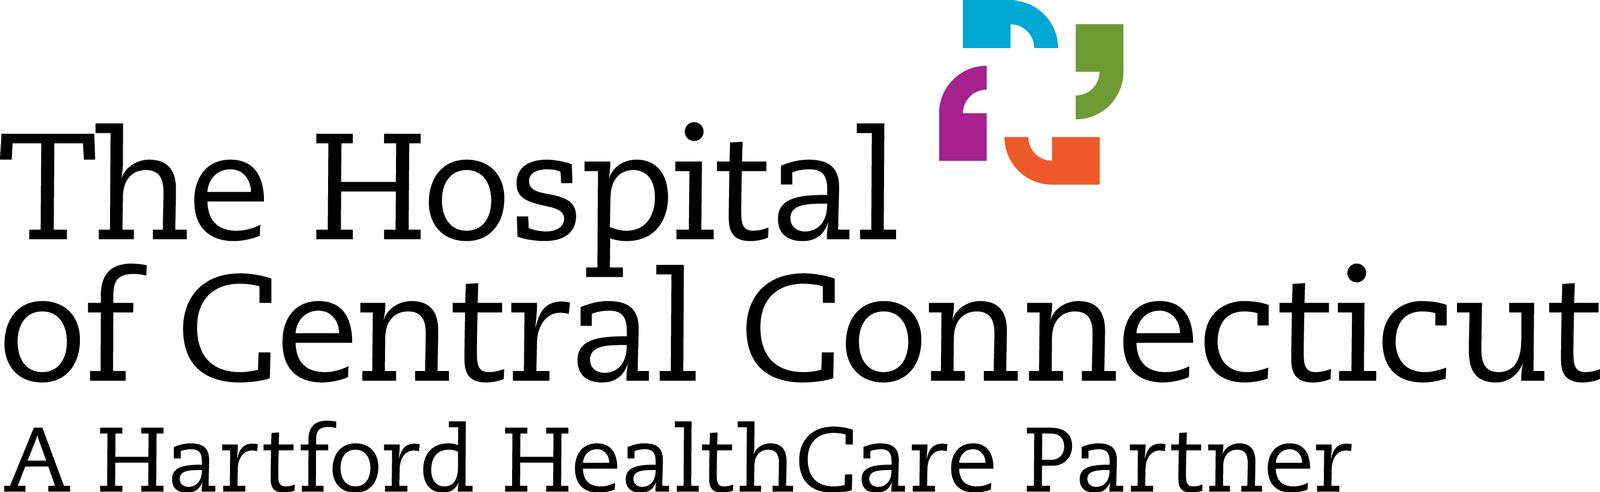 The Hospital of Central Connecticut